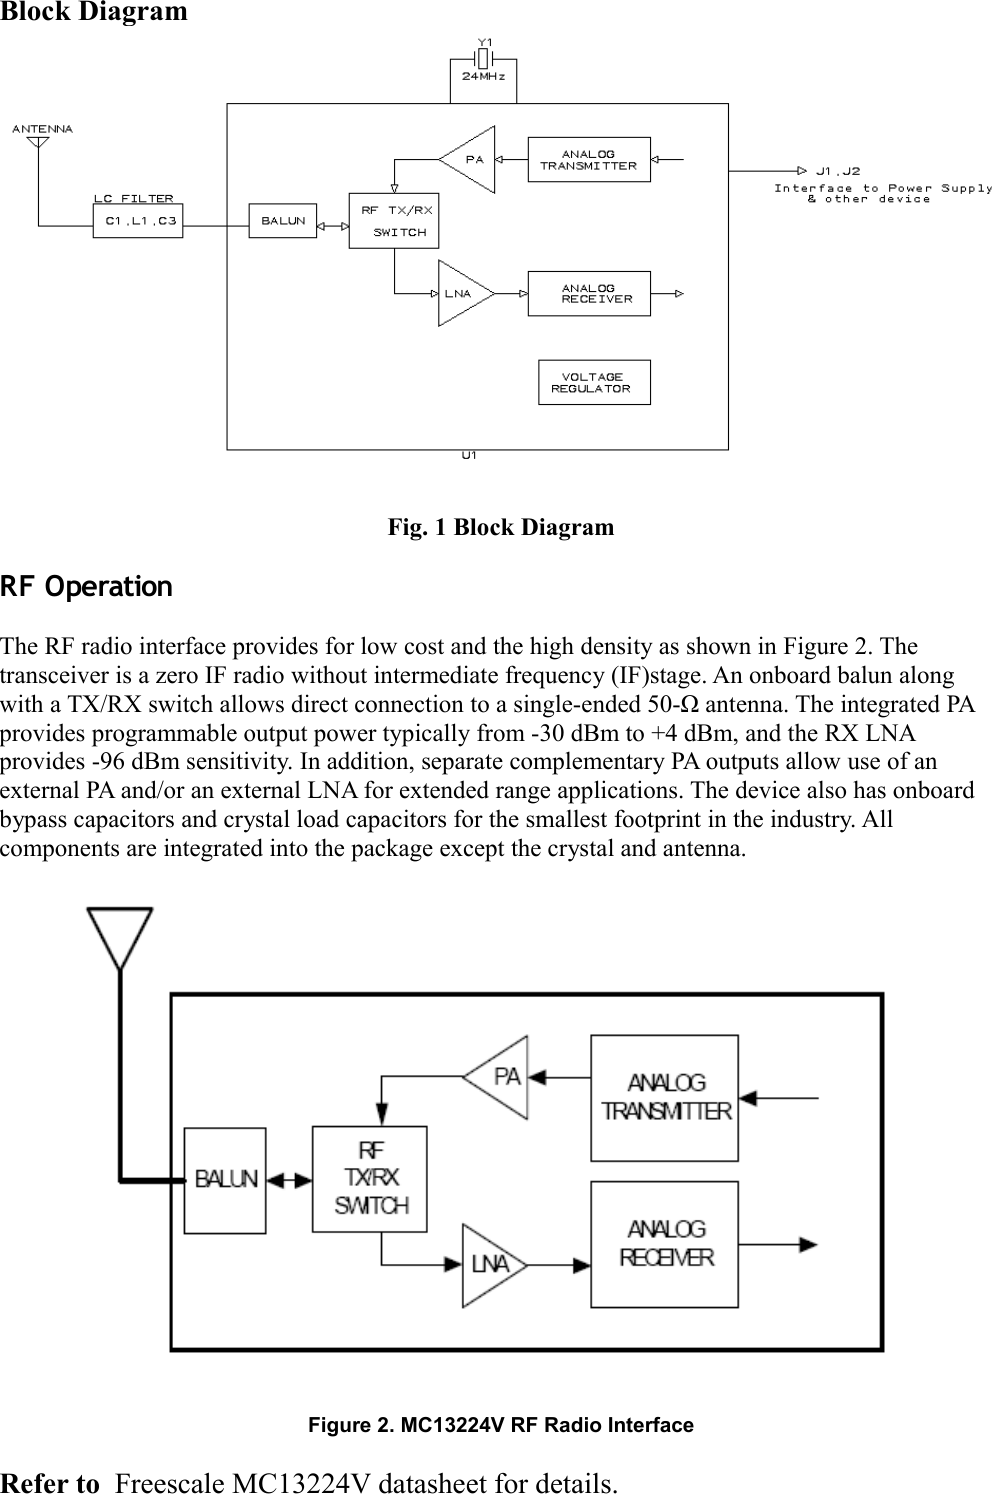 Block DiagramFig. 1 Block DiagramRF OperationThe RF radio interface provides for low cost and the high density as shown in Figure 2. The transceiver is a zero IF radio without intermediate frequency (IF)stage. An onboard balun along with a TX/RX switch allows direct connection to a single-ended 50-Ω antenna. The integrated PA provides programmable output power typically from -30 dBm to +4 dBm, and the RX LNA provides -96 dBm sensitivity. In addition, separate complementary PA outputs allow use of an external PA and/or an external LNA for extended range applications. The device also has onboard bypass capacitors and crystal load capacitors for the smallest footprint in the industry. All components are integrated into the package except the crystal and antenna.Figure 2. MC13224V RF Radio InterfaceRefer to  Freescale MC13224V datasheet for details.